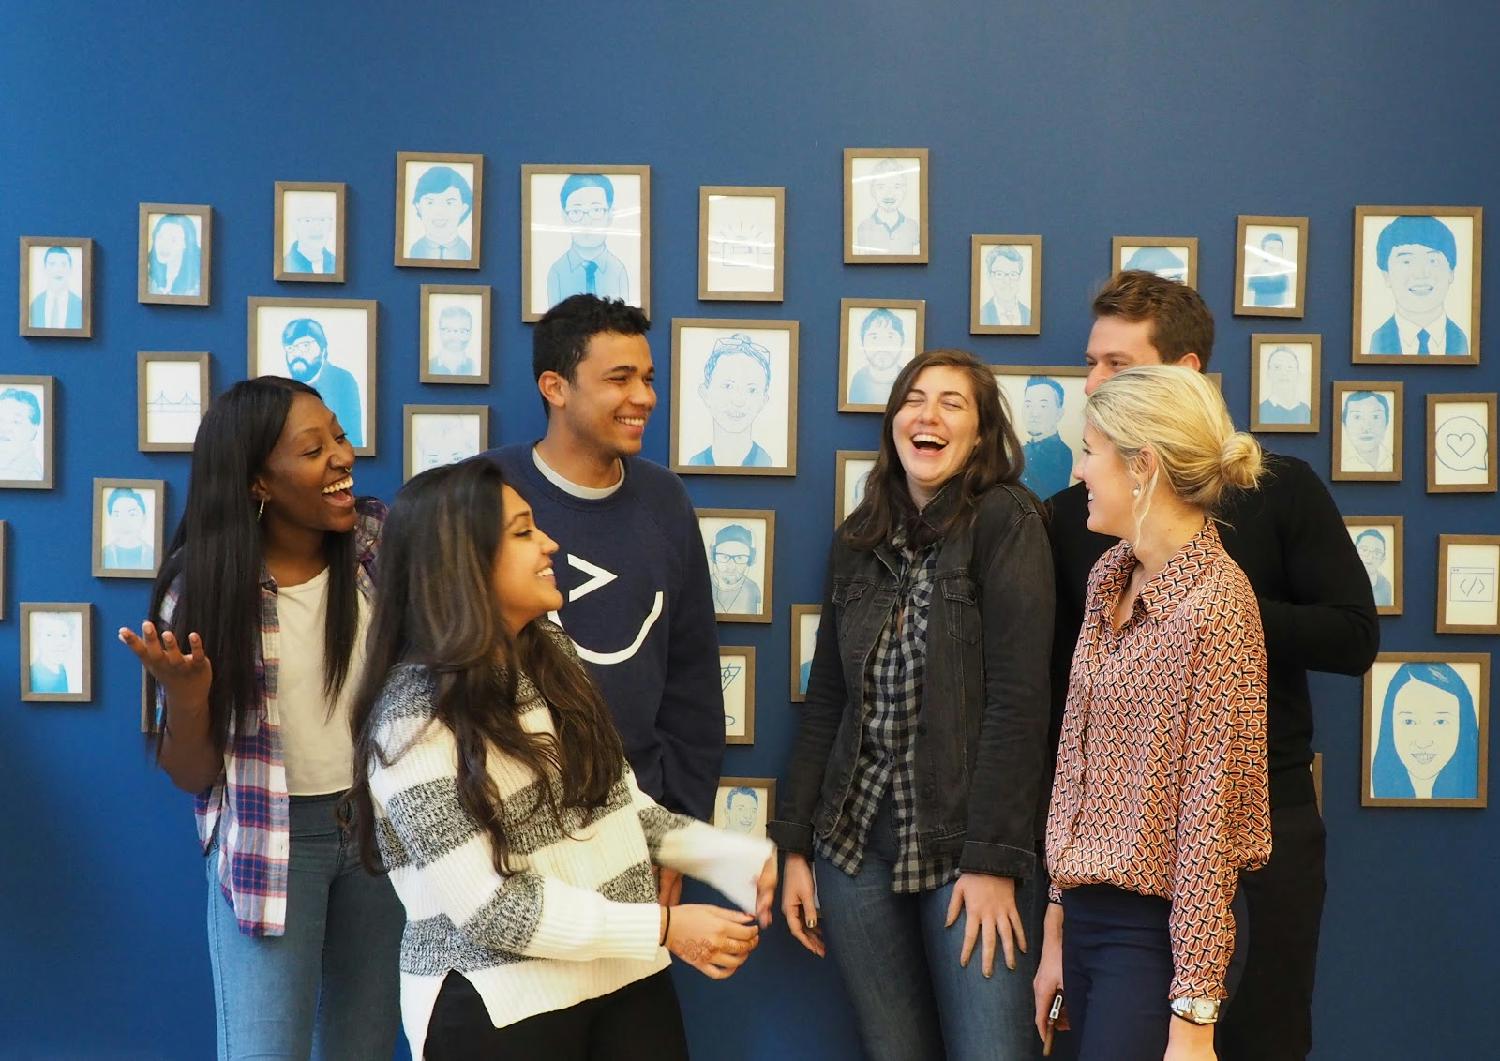 Our Candidate Experience Team sharing a joke and prepping for new head shots in our NYC headquarters.